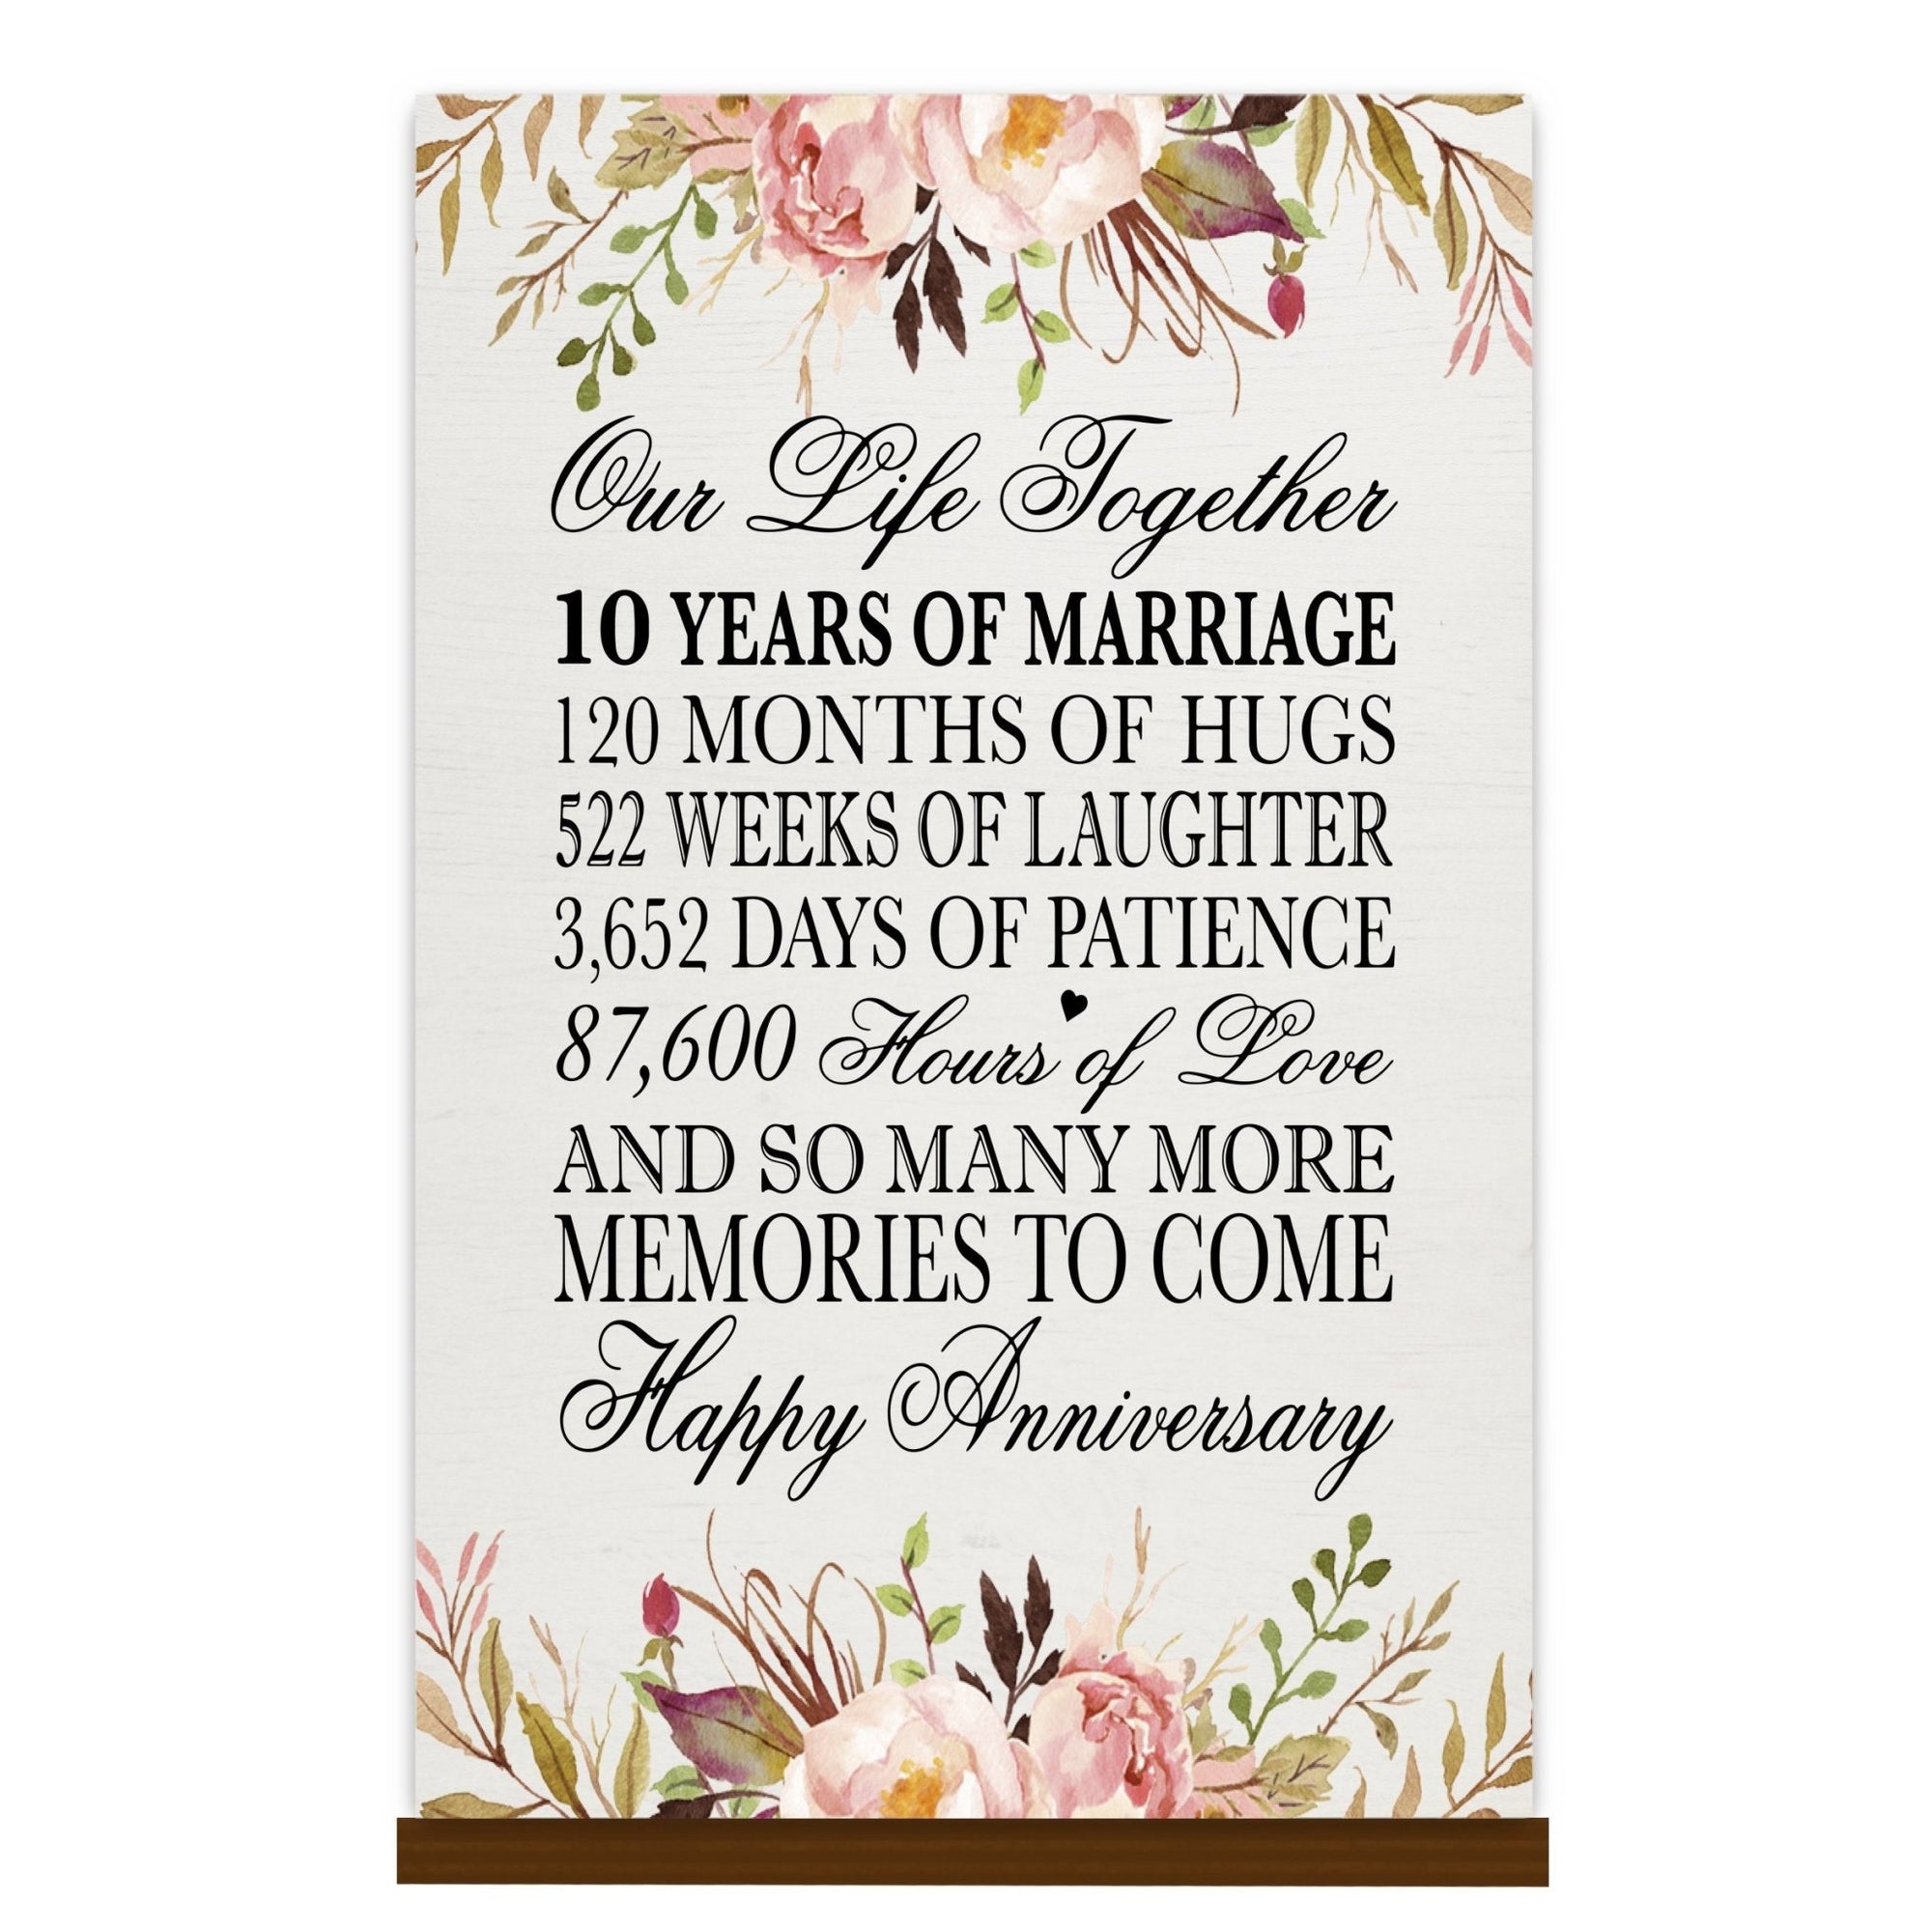 LifeSong Milestones 10th Anniversary Wall Plaque for Couples